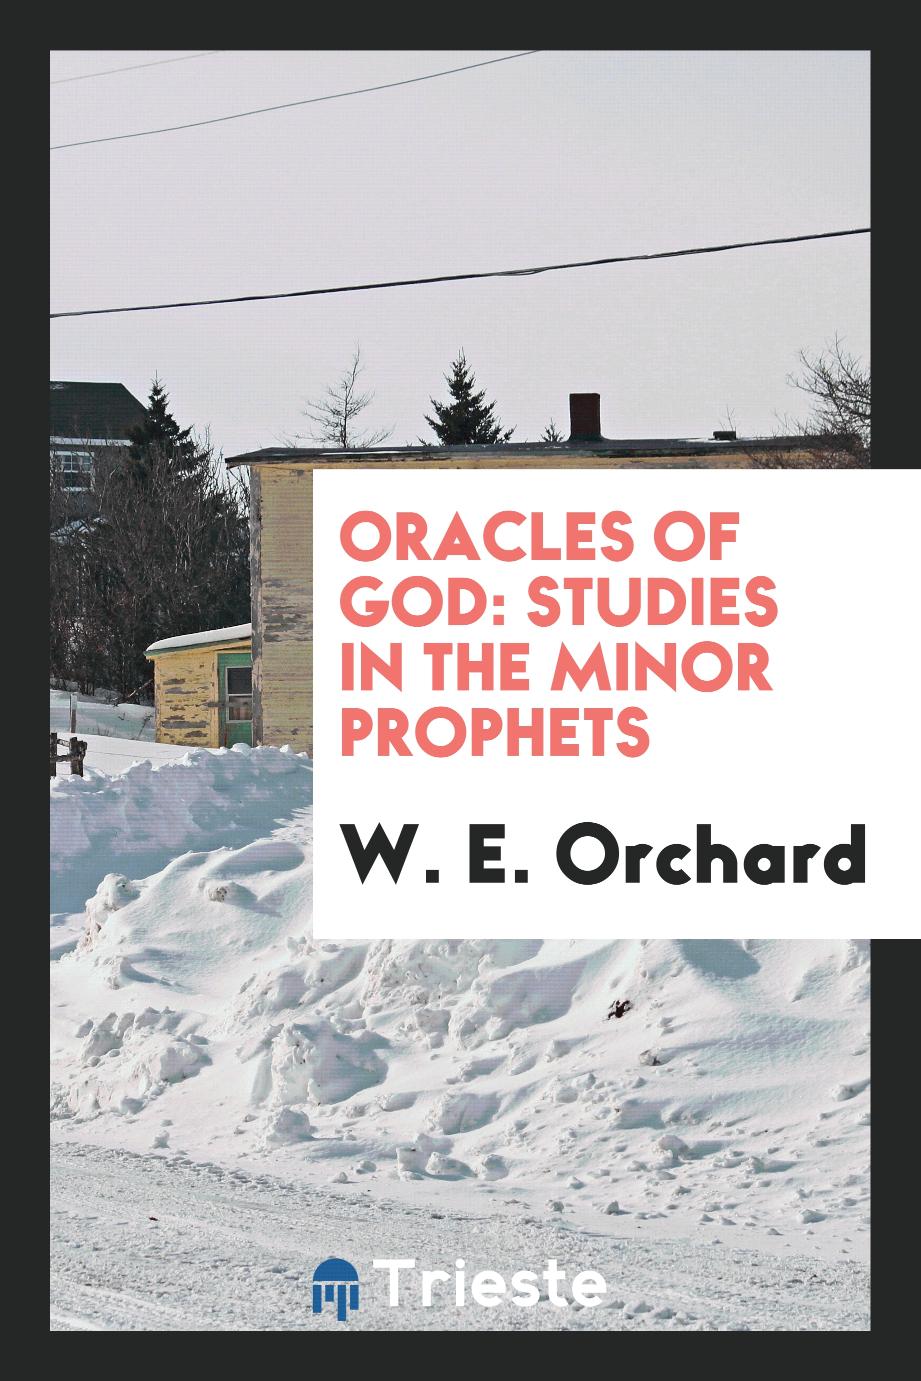 W. E. Orchard - Oracles of God: studies in the Minor Prophets